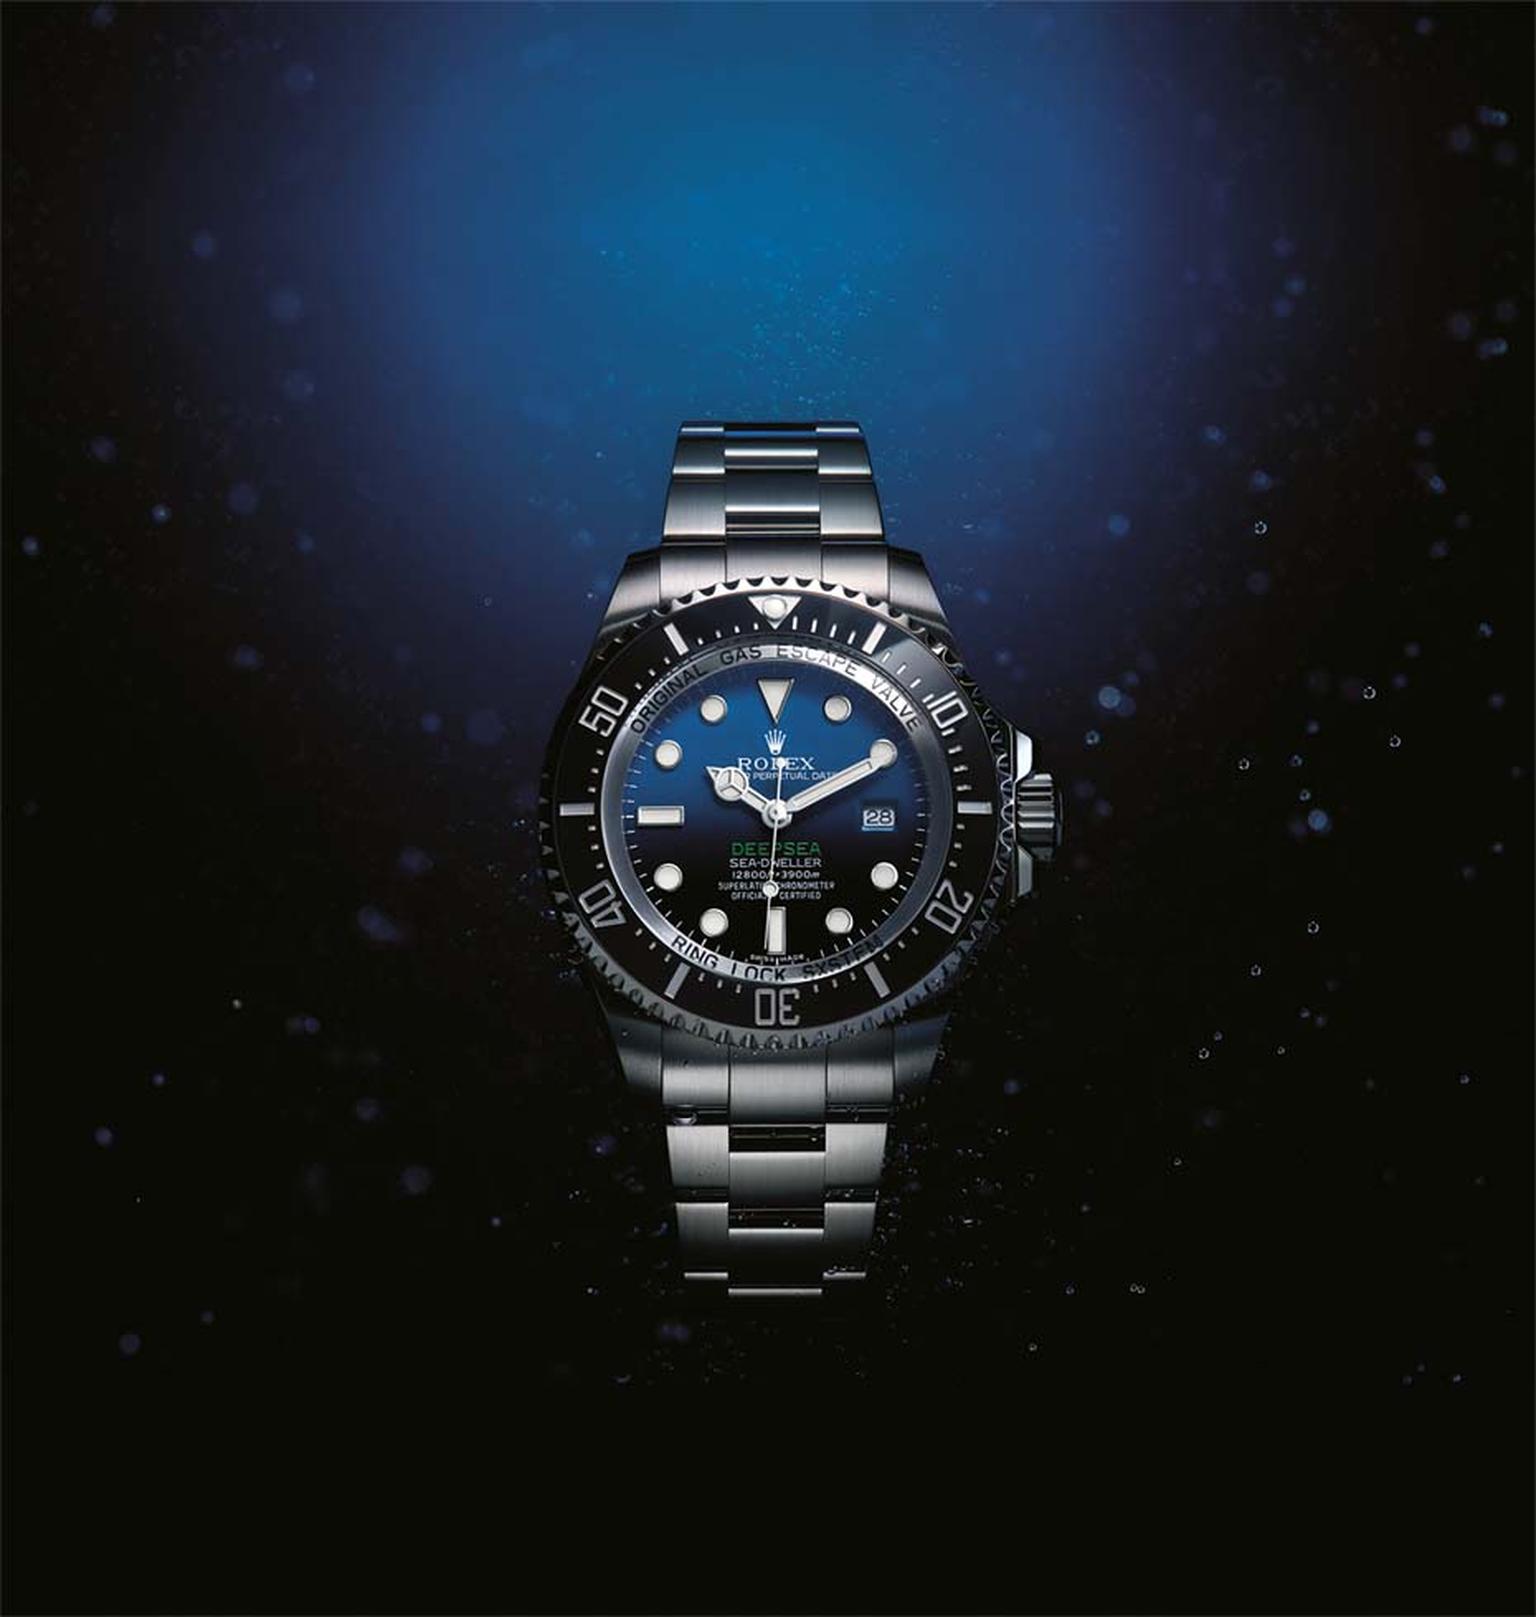 Equipped with an innovative Chromalight display that lights up the depths with a long-lasting blue glow, the Rolex 44mm Deepsea Sea-Dweller watch also features the hallmark Rolex safety valve, which acts as a miniature decompression chamber for the watch.